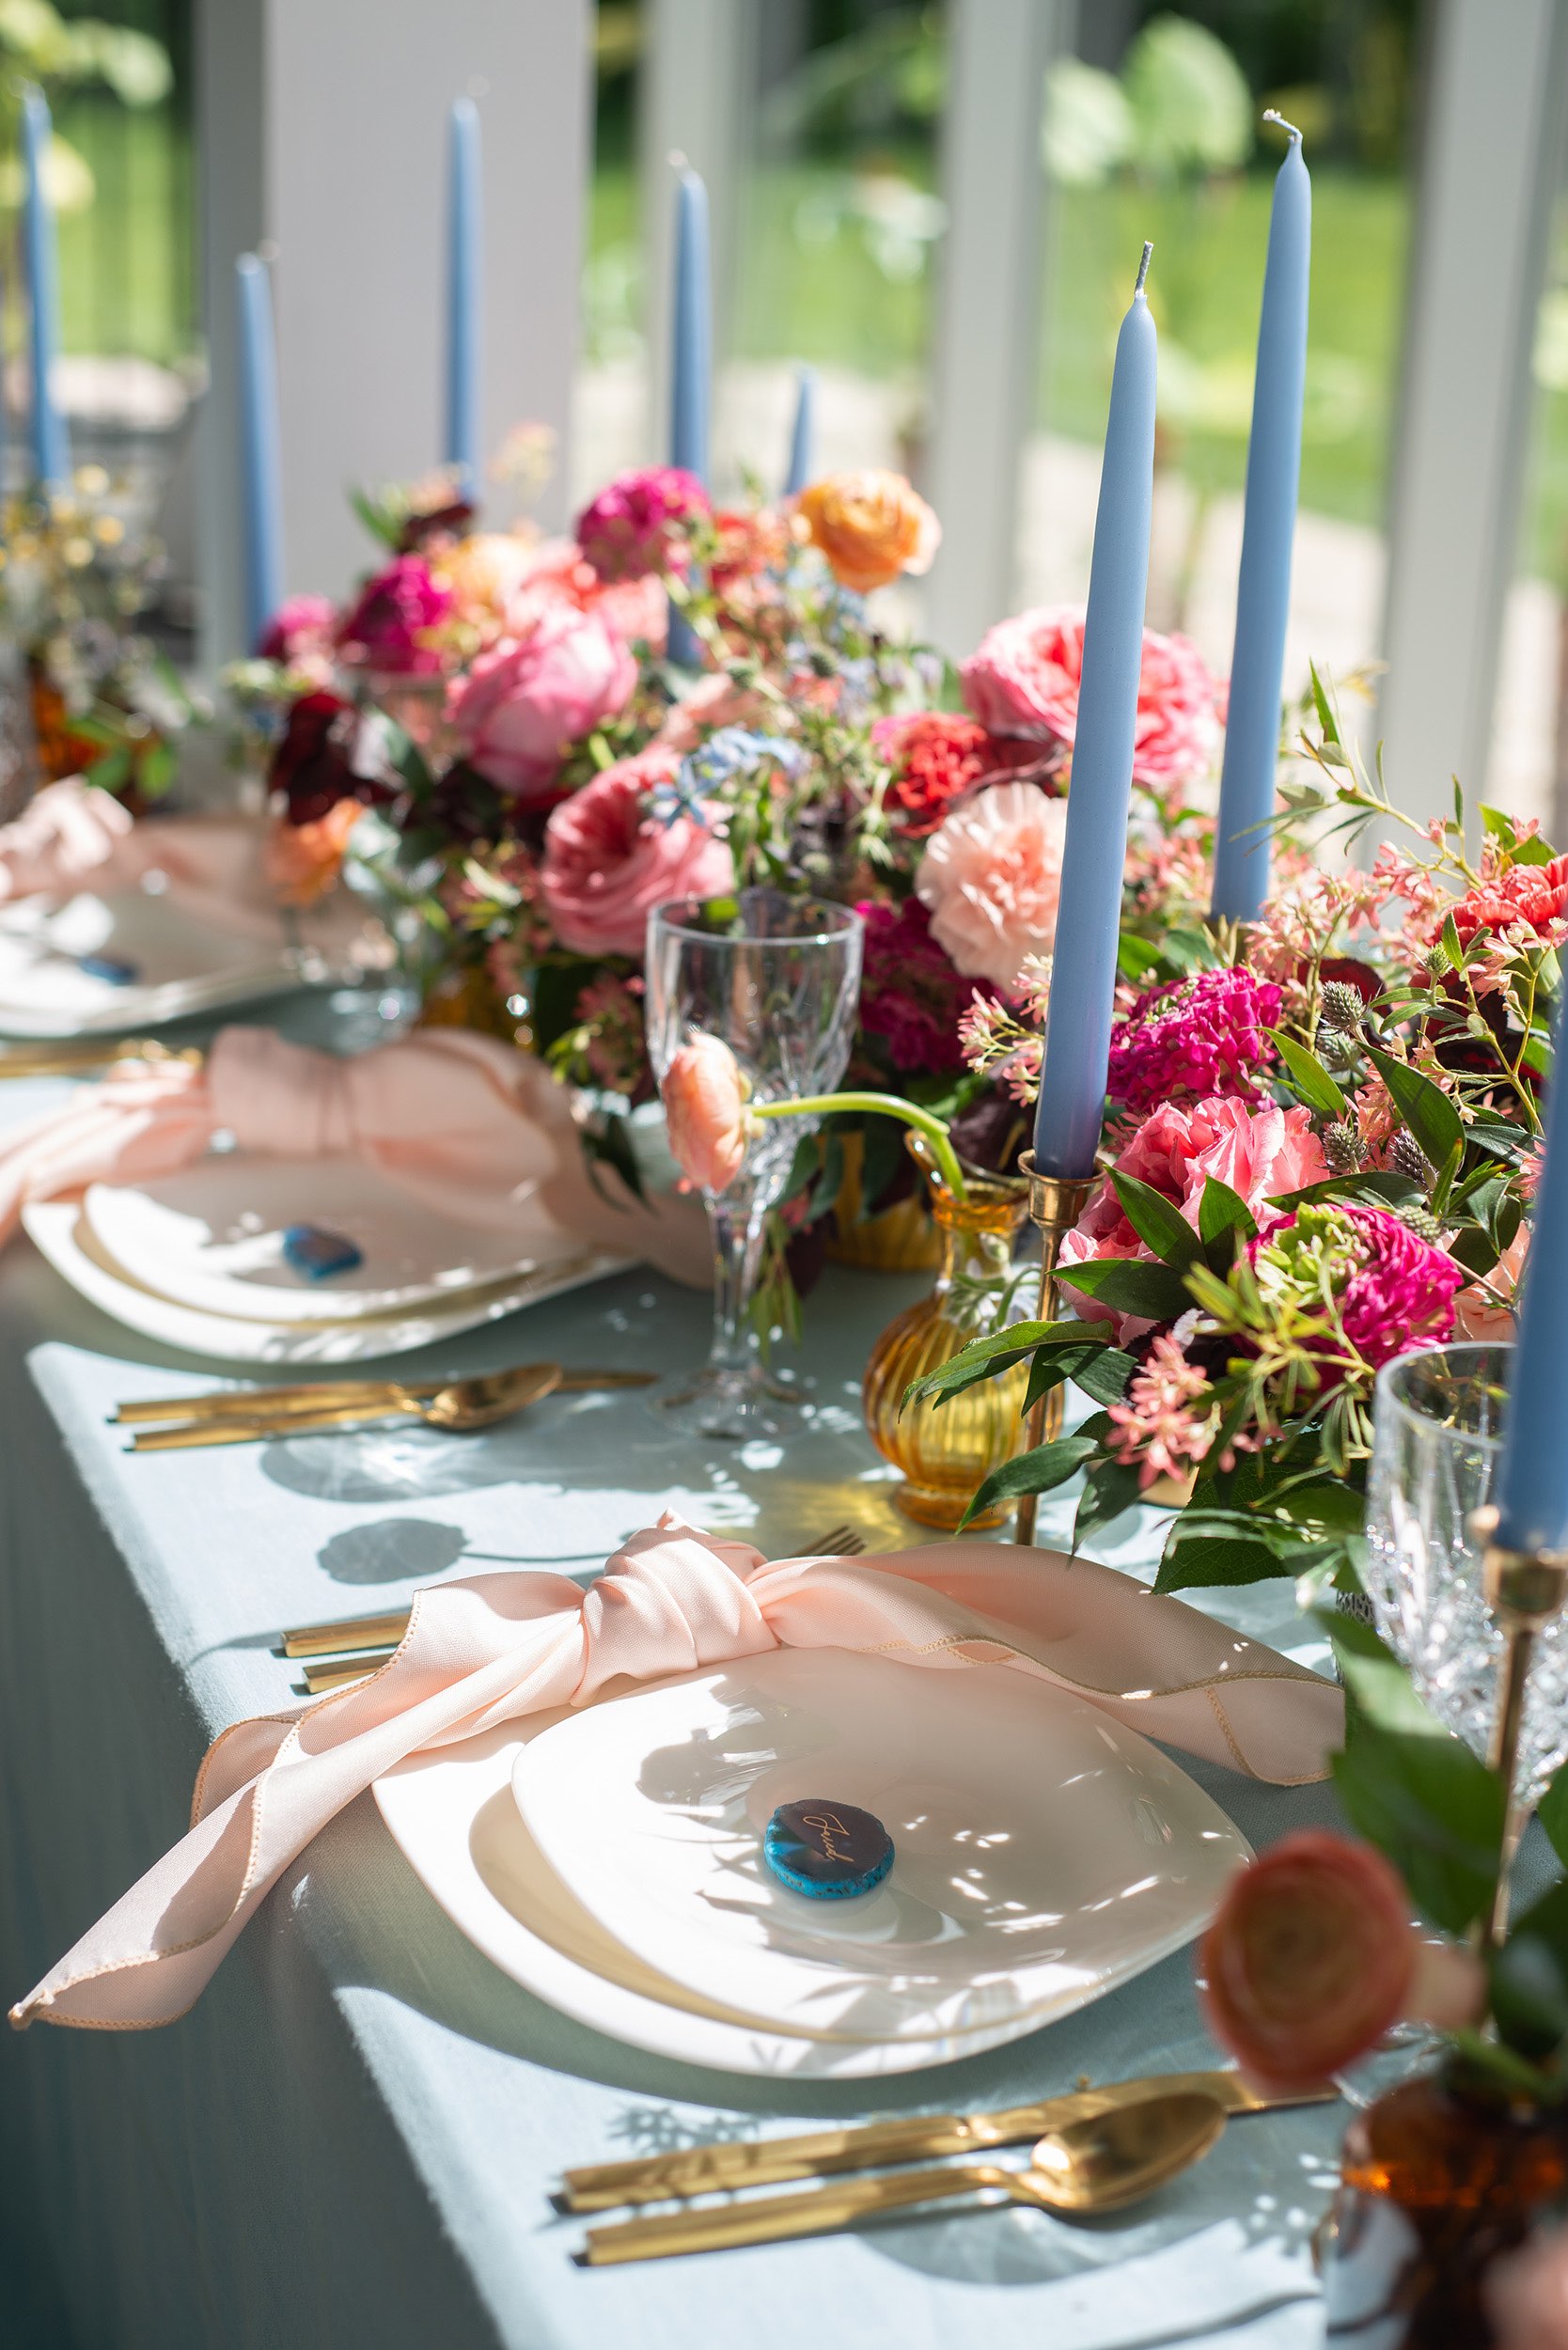 White table setting with gold flatware and colorful flowers at wedding venue.